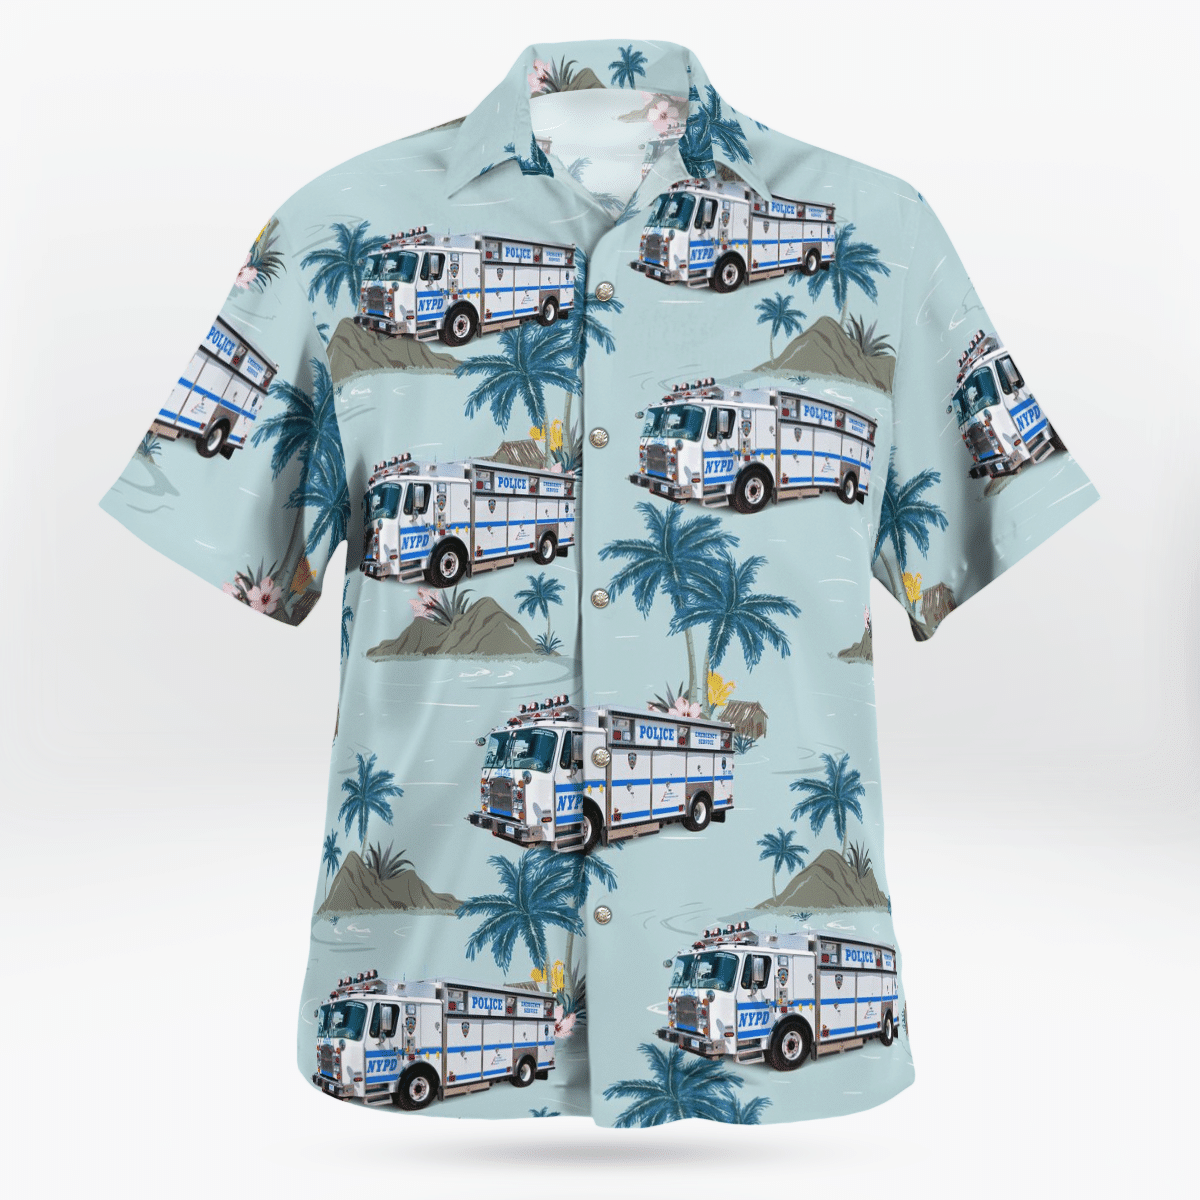 HOT New York City Police Department Emergency Service Unit Tropical Shirt1